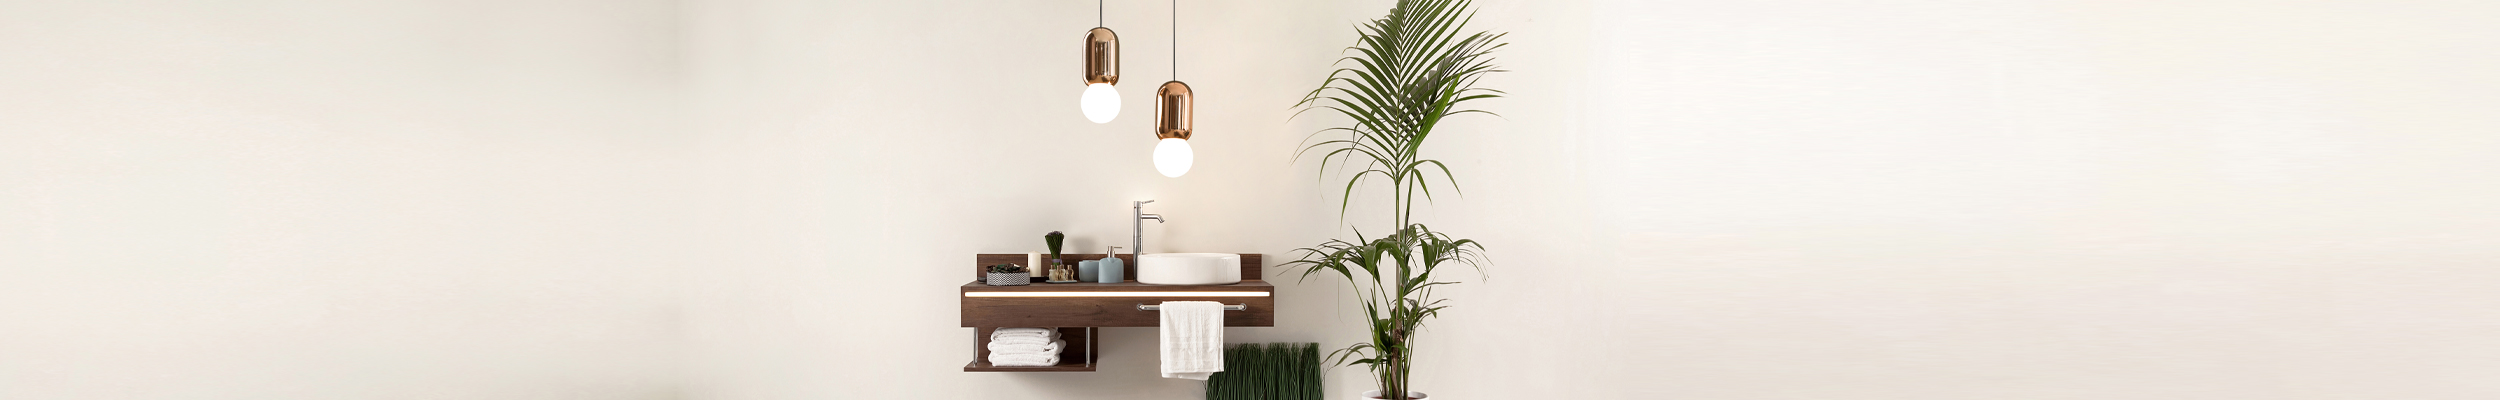 Minimalist bathroom sink / vanity unit with strip lighting on the front, lifestyle accessories and distinctive pendants